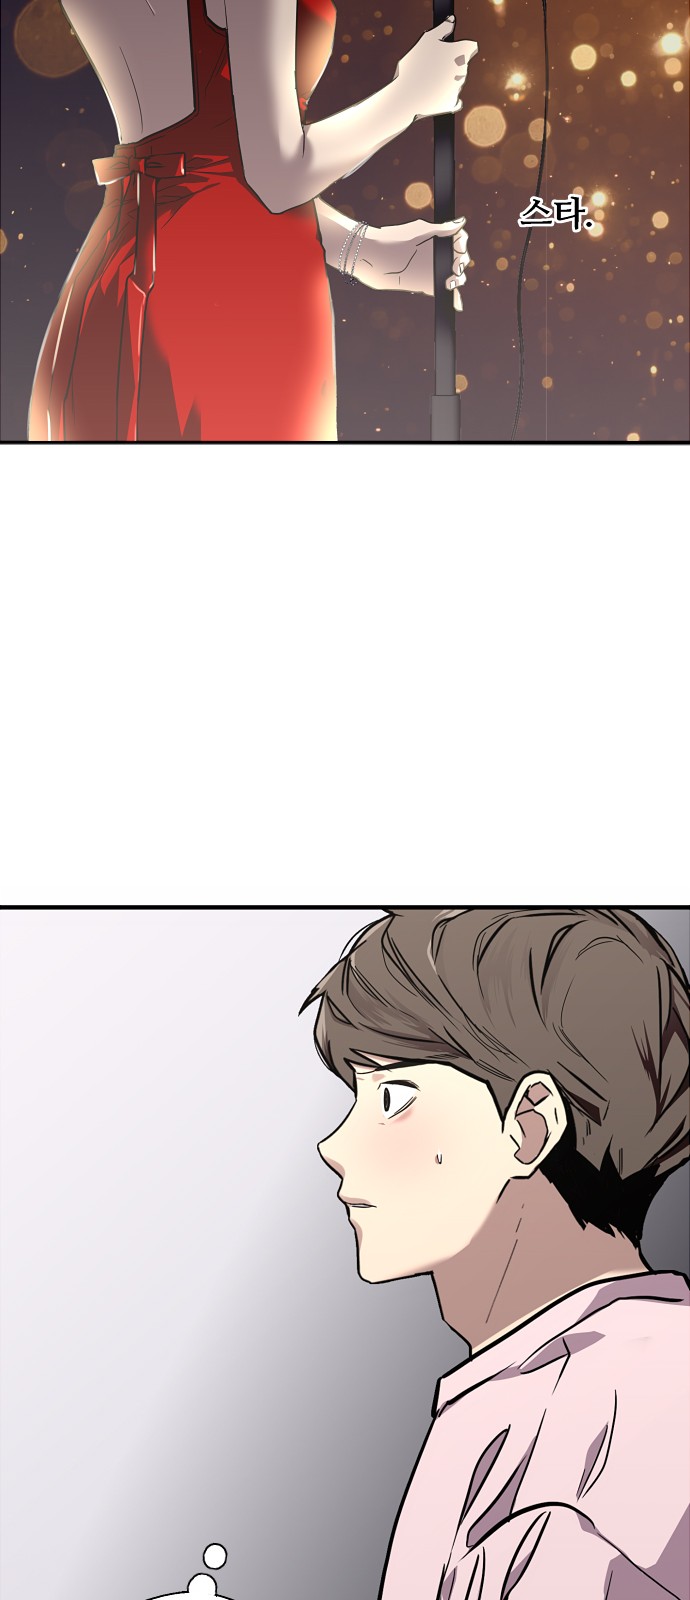 The Girl Downstairs - Chapter 81 - Page 3